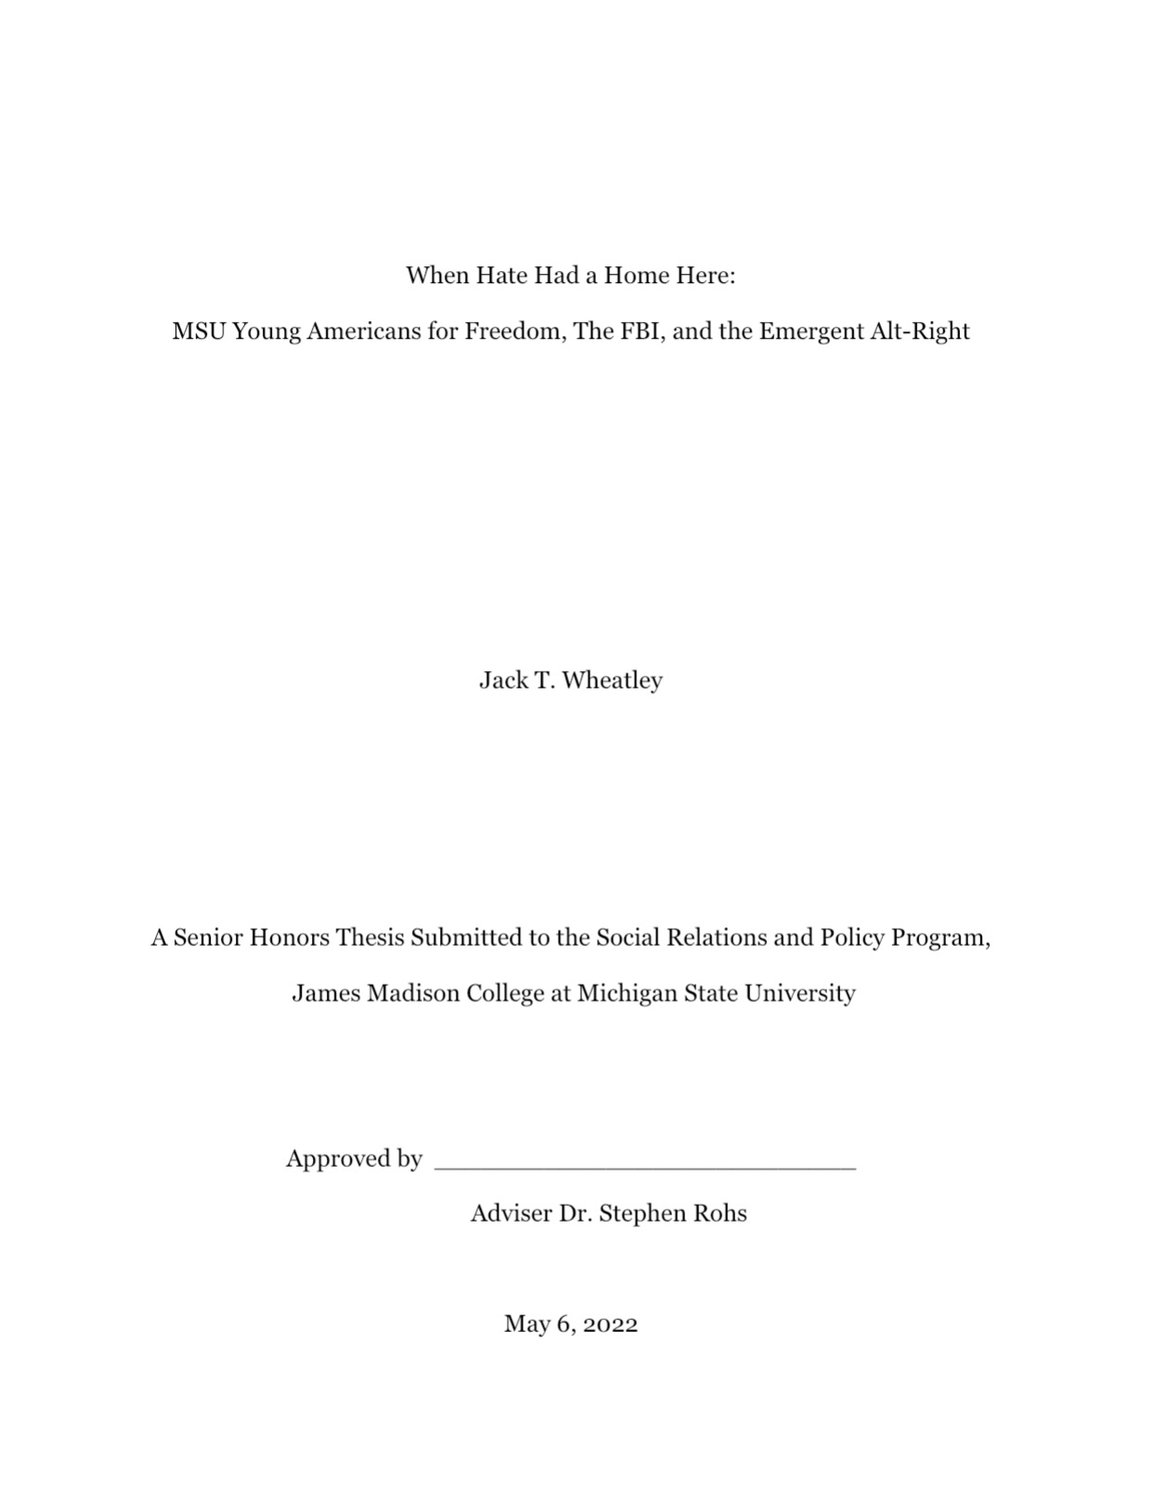 The title page of  Wheatley's senior honors thesis. He was originally scheduled to present the thesis in person today, but MSU officials, citing safety and security concerns, changed the presentation to a Zoom presentation.